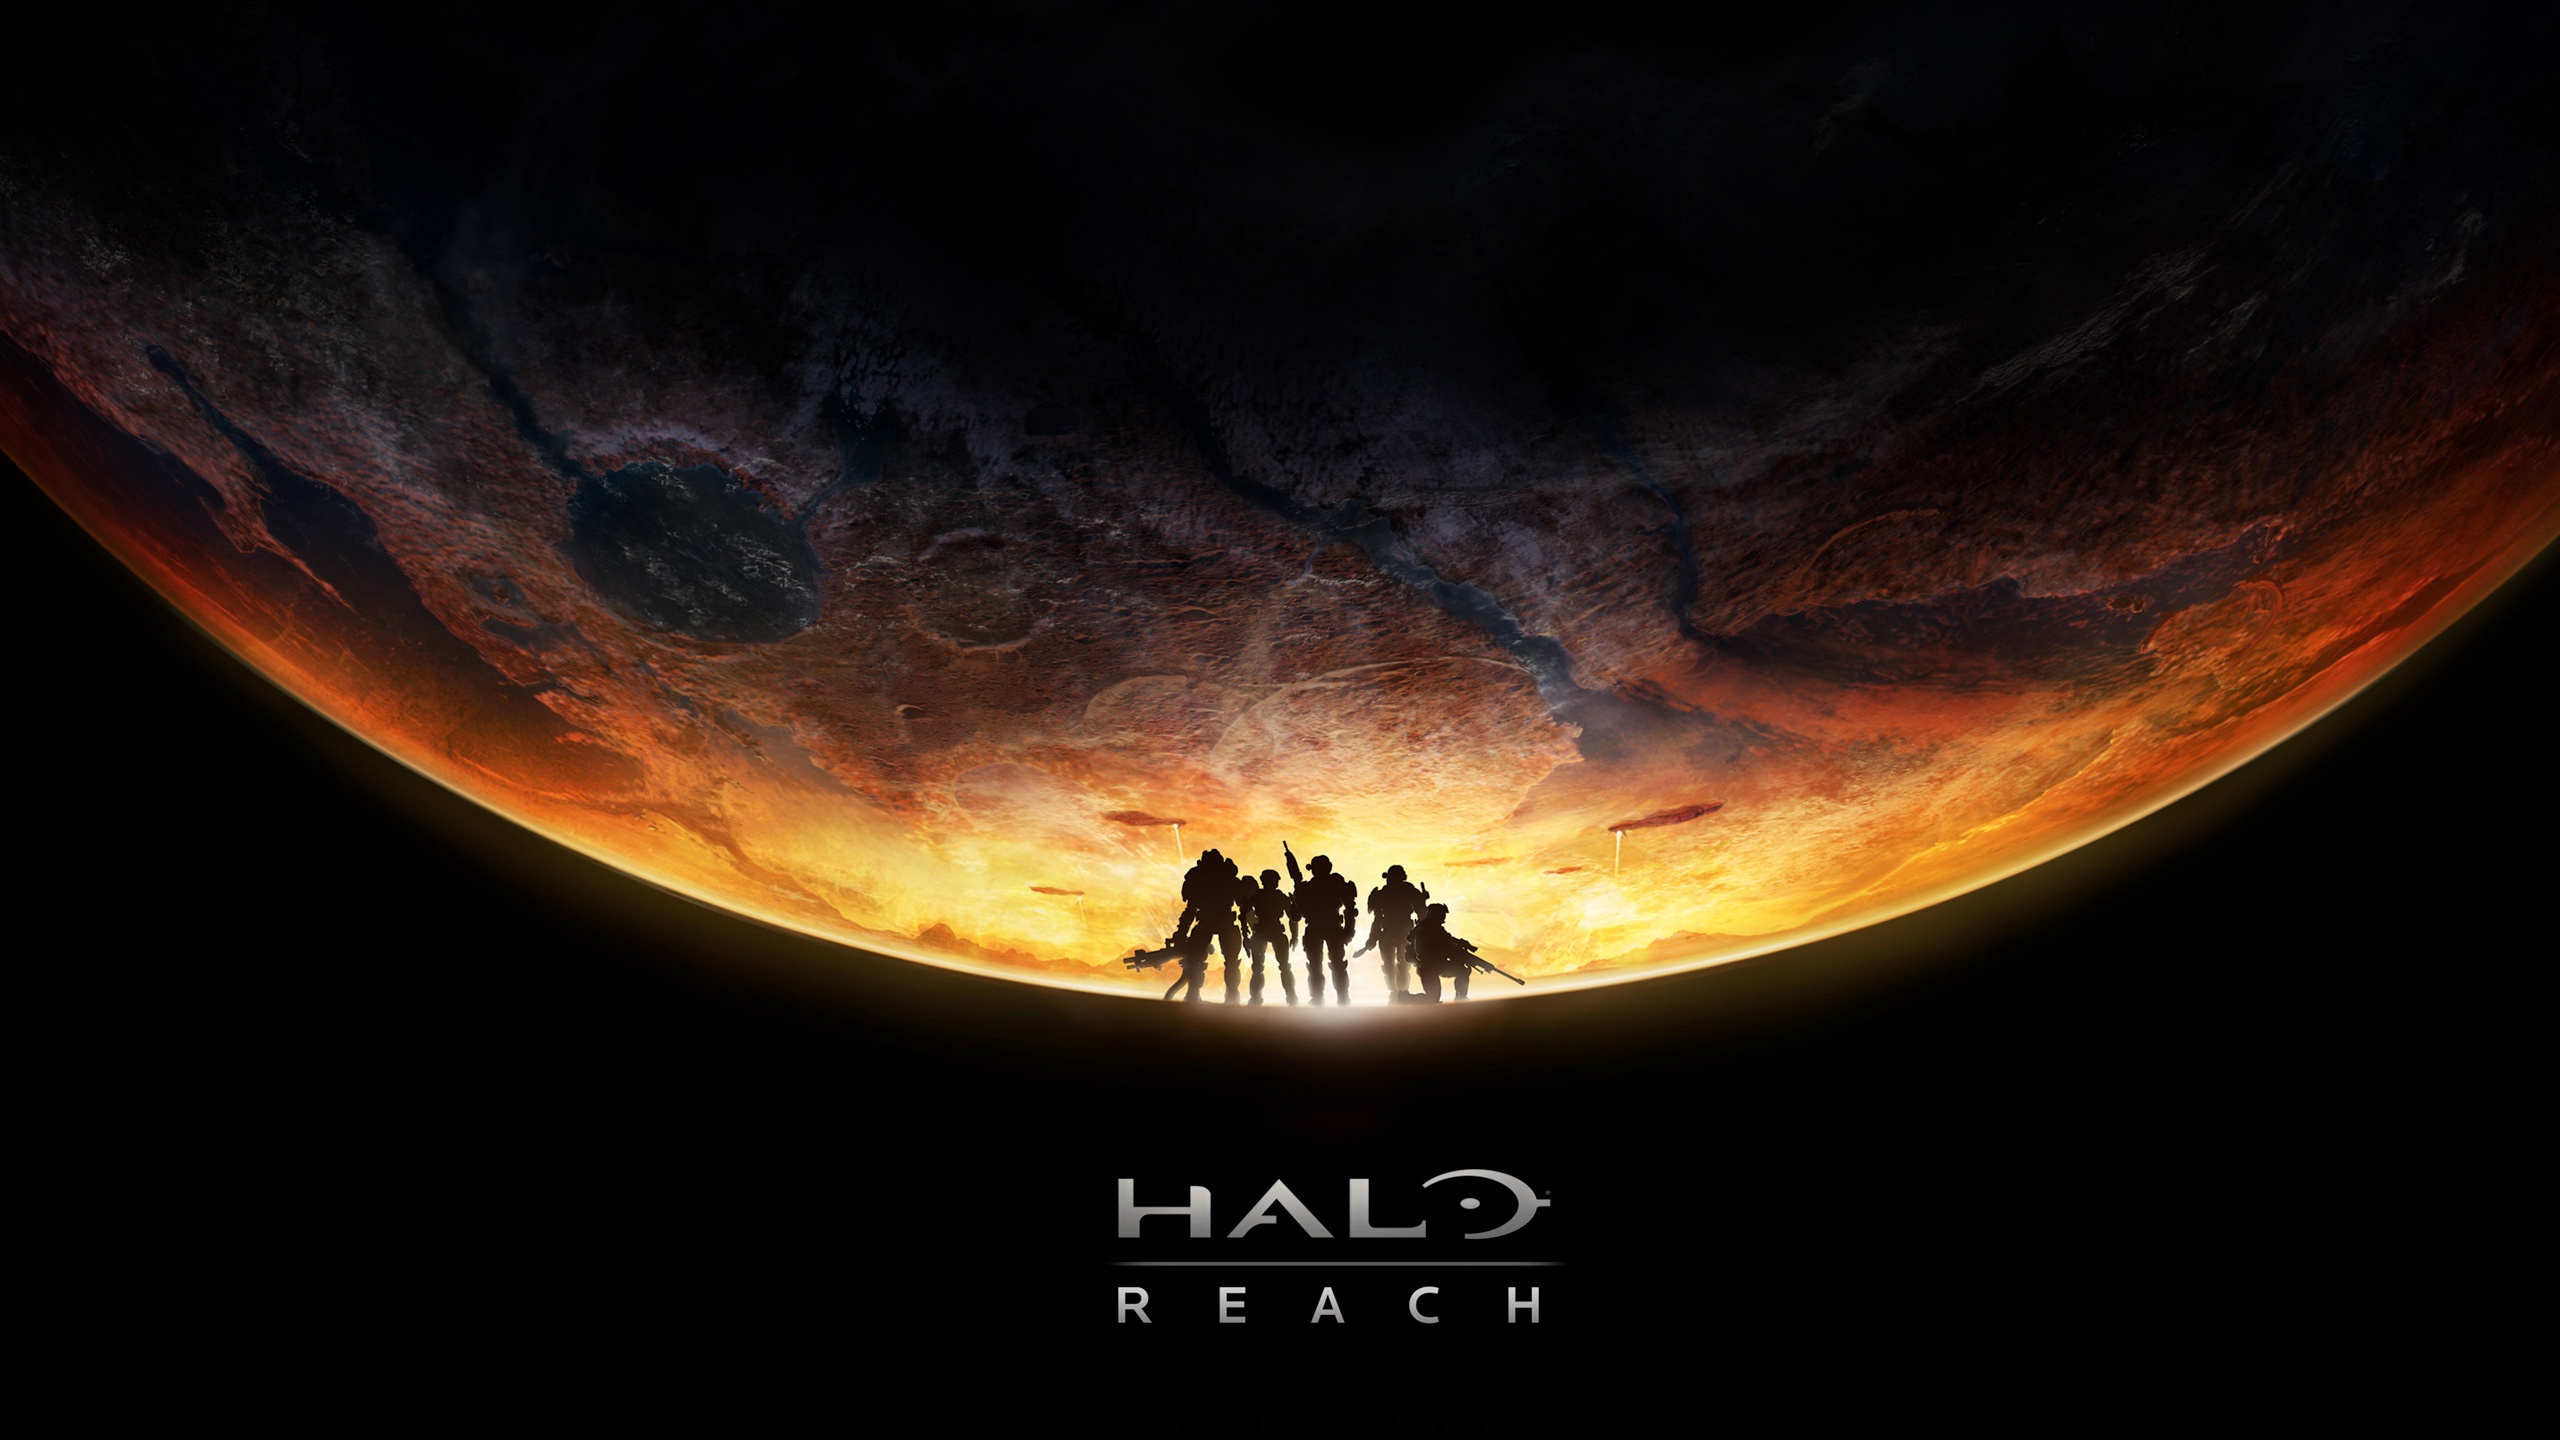 Fascinating Microsoft Halo Reach Space Animated Ideas Wallpaper